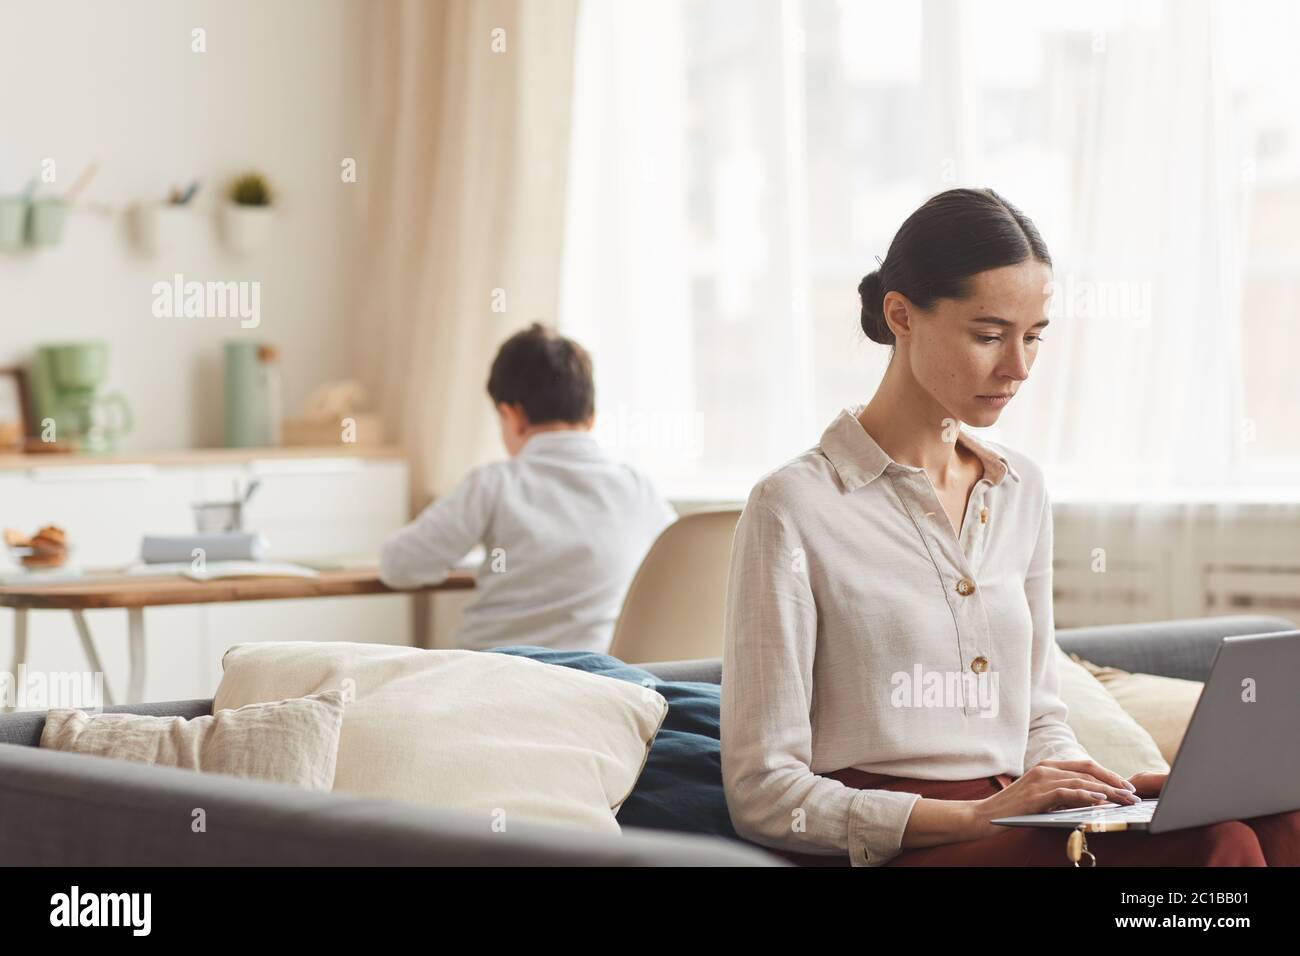 Warm-toned portrait of elegant young woman using laptop while working at home with her son studying in background, copy space Stock Photo